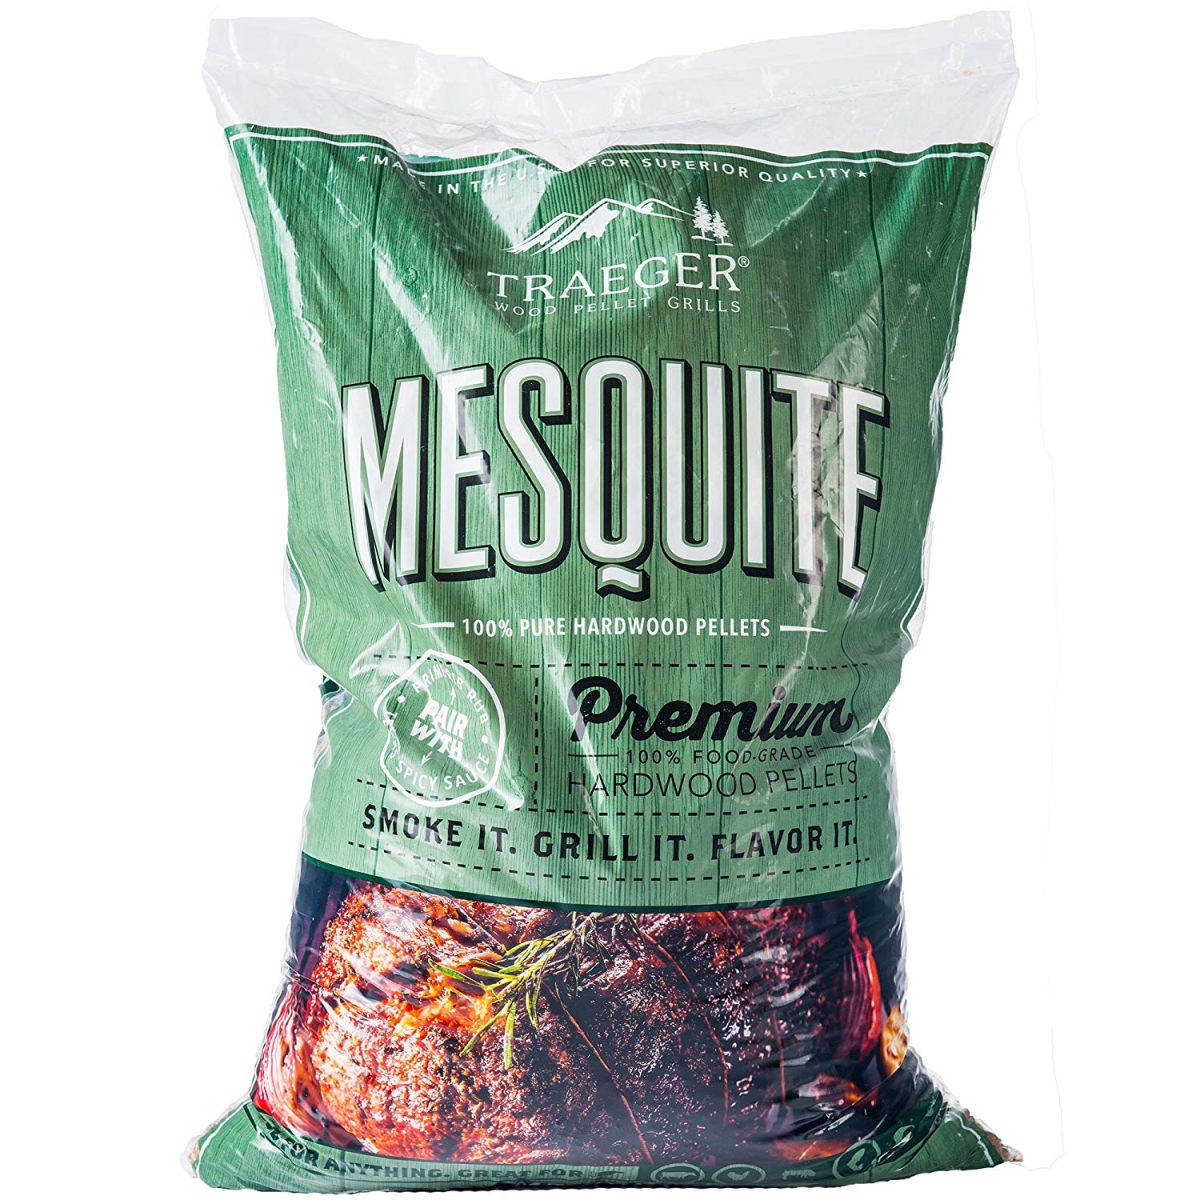 258691 20 Lbs Smokefire Mesquit Barbeque Wood Pellets